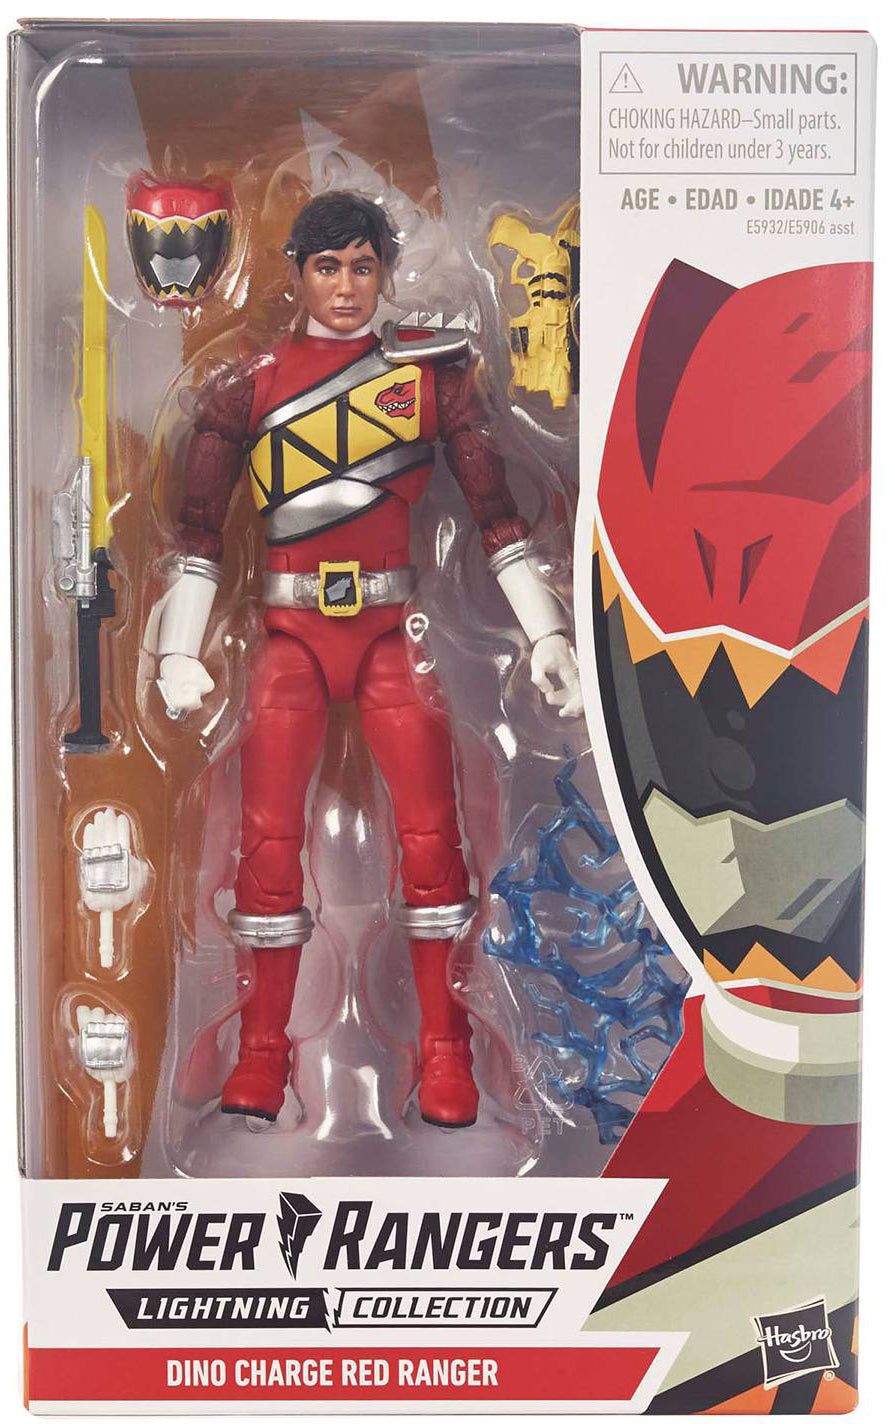 Power Rangers Lightning Collection 6 Inch Action Figure Series 1 - Dino Red Ranger